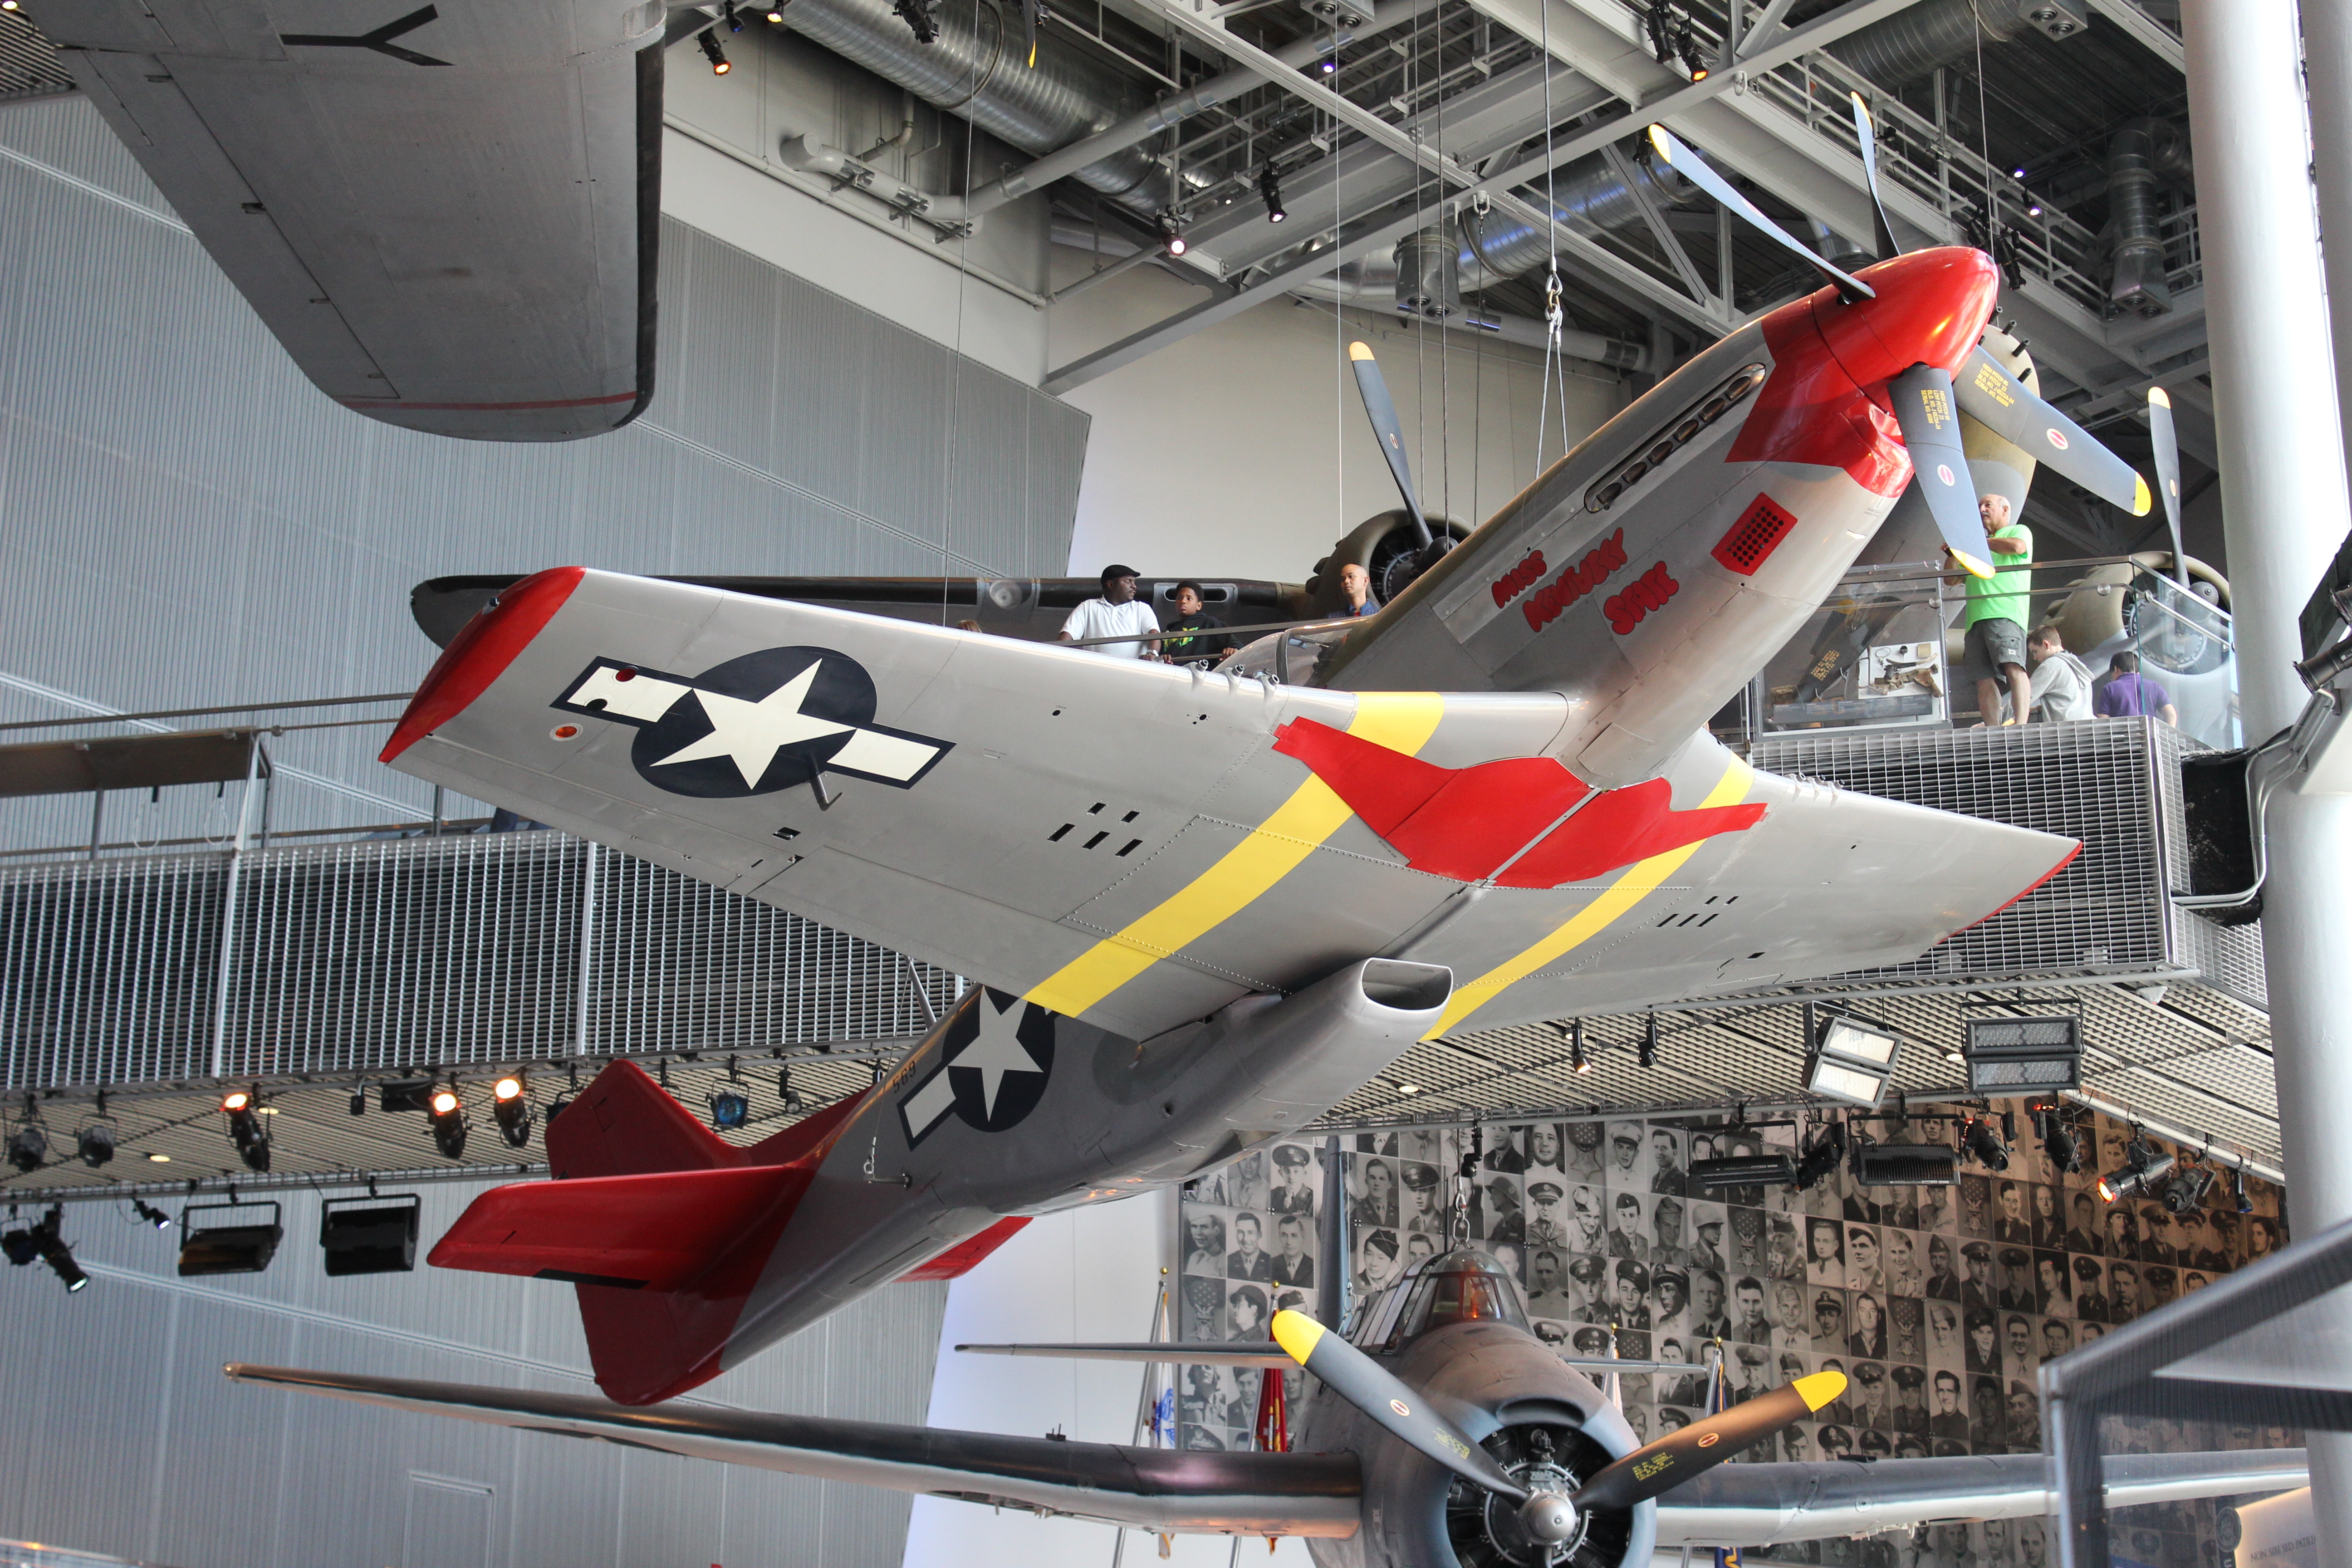 WWII Aircraft at WWII D-Day Museum New Orleans, Louisiana | ronscloset